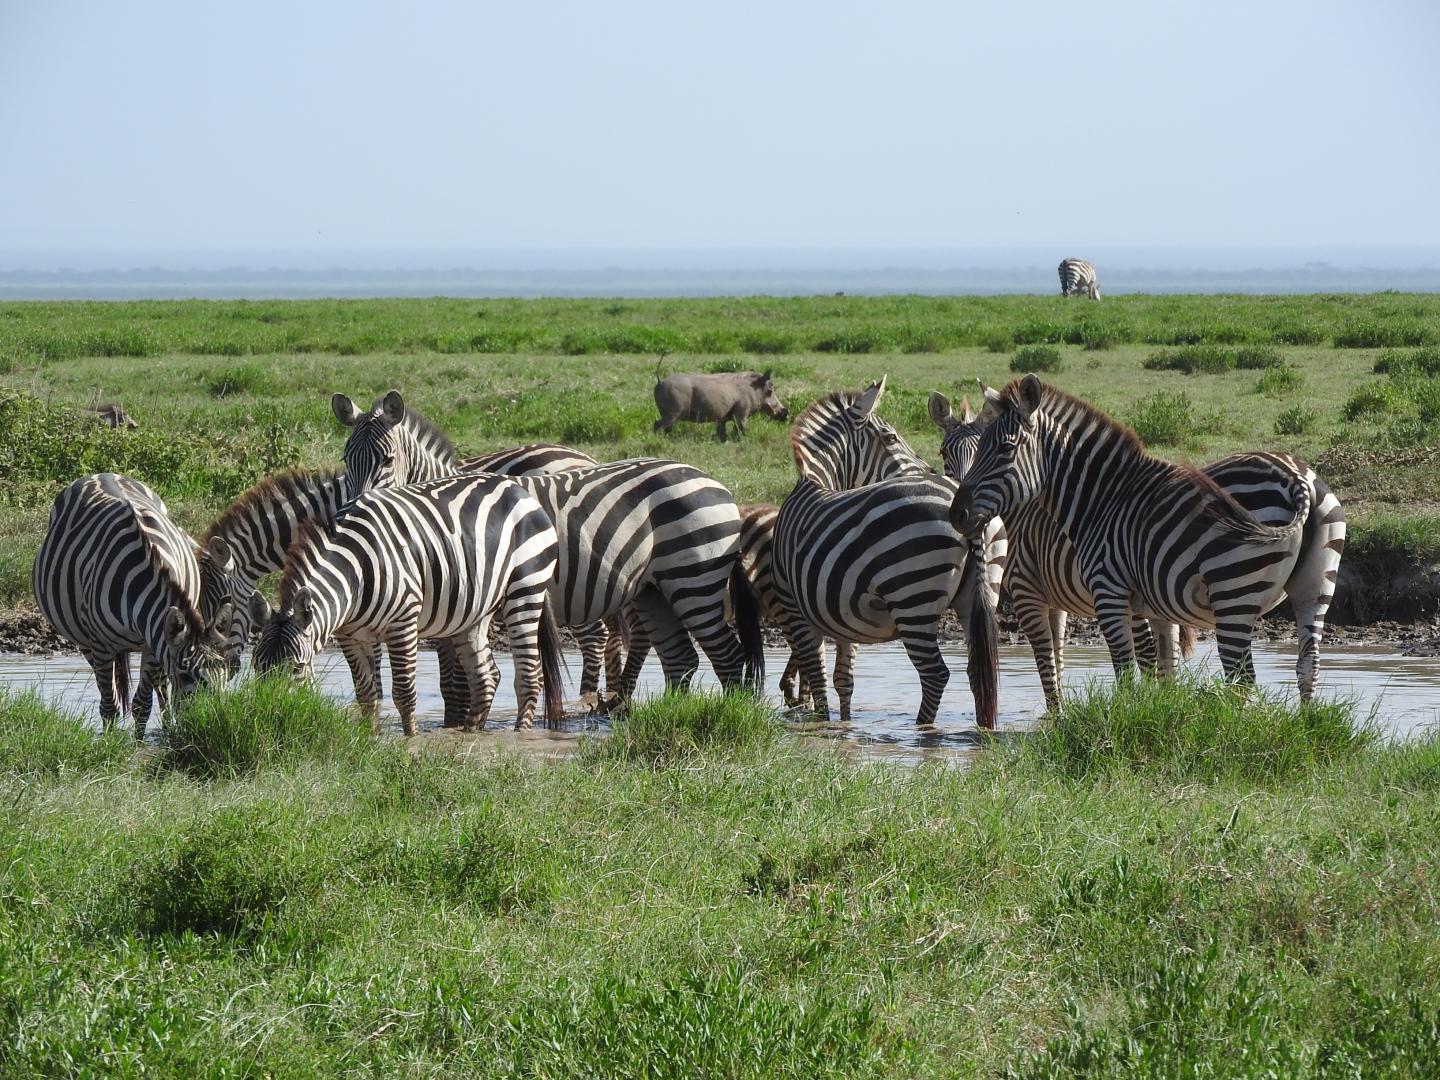 A Dazzle of Zebras at a Waterhole in East Africa